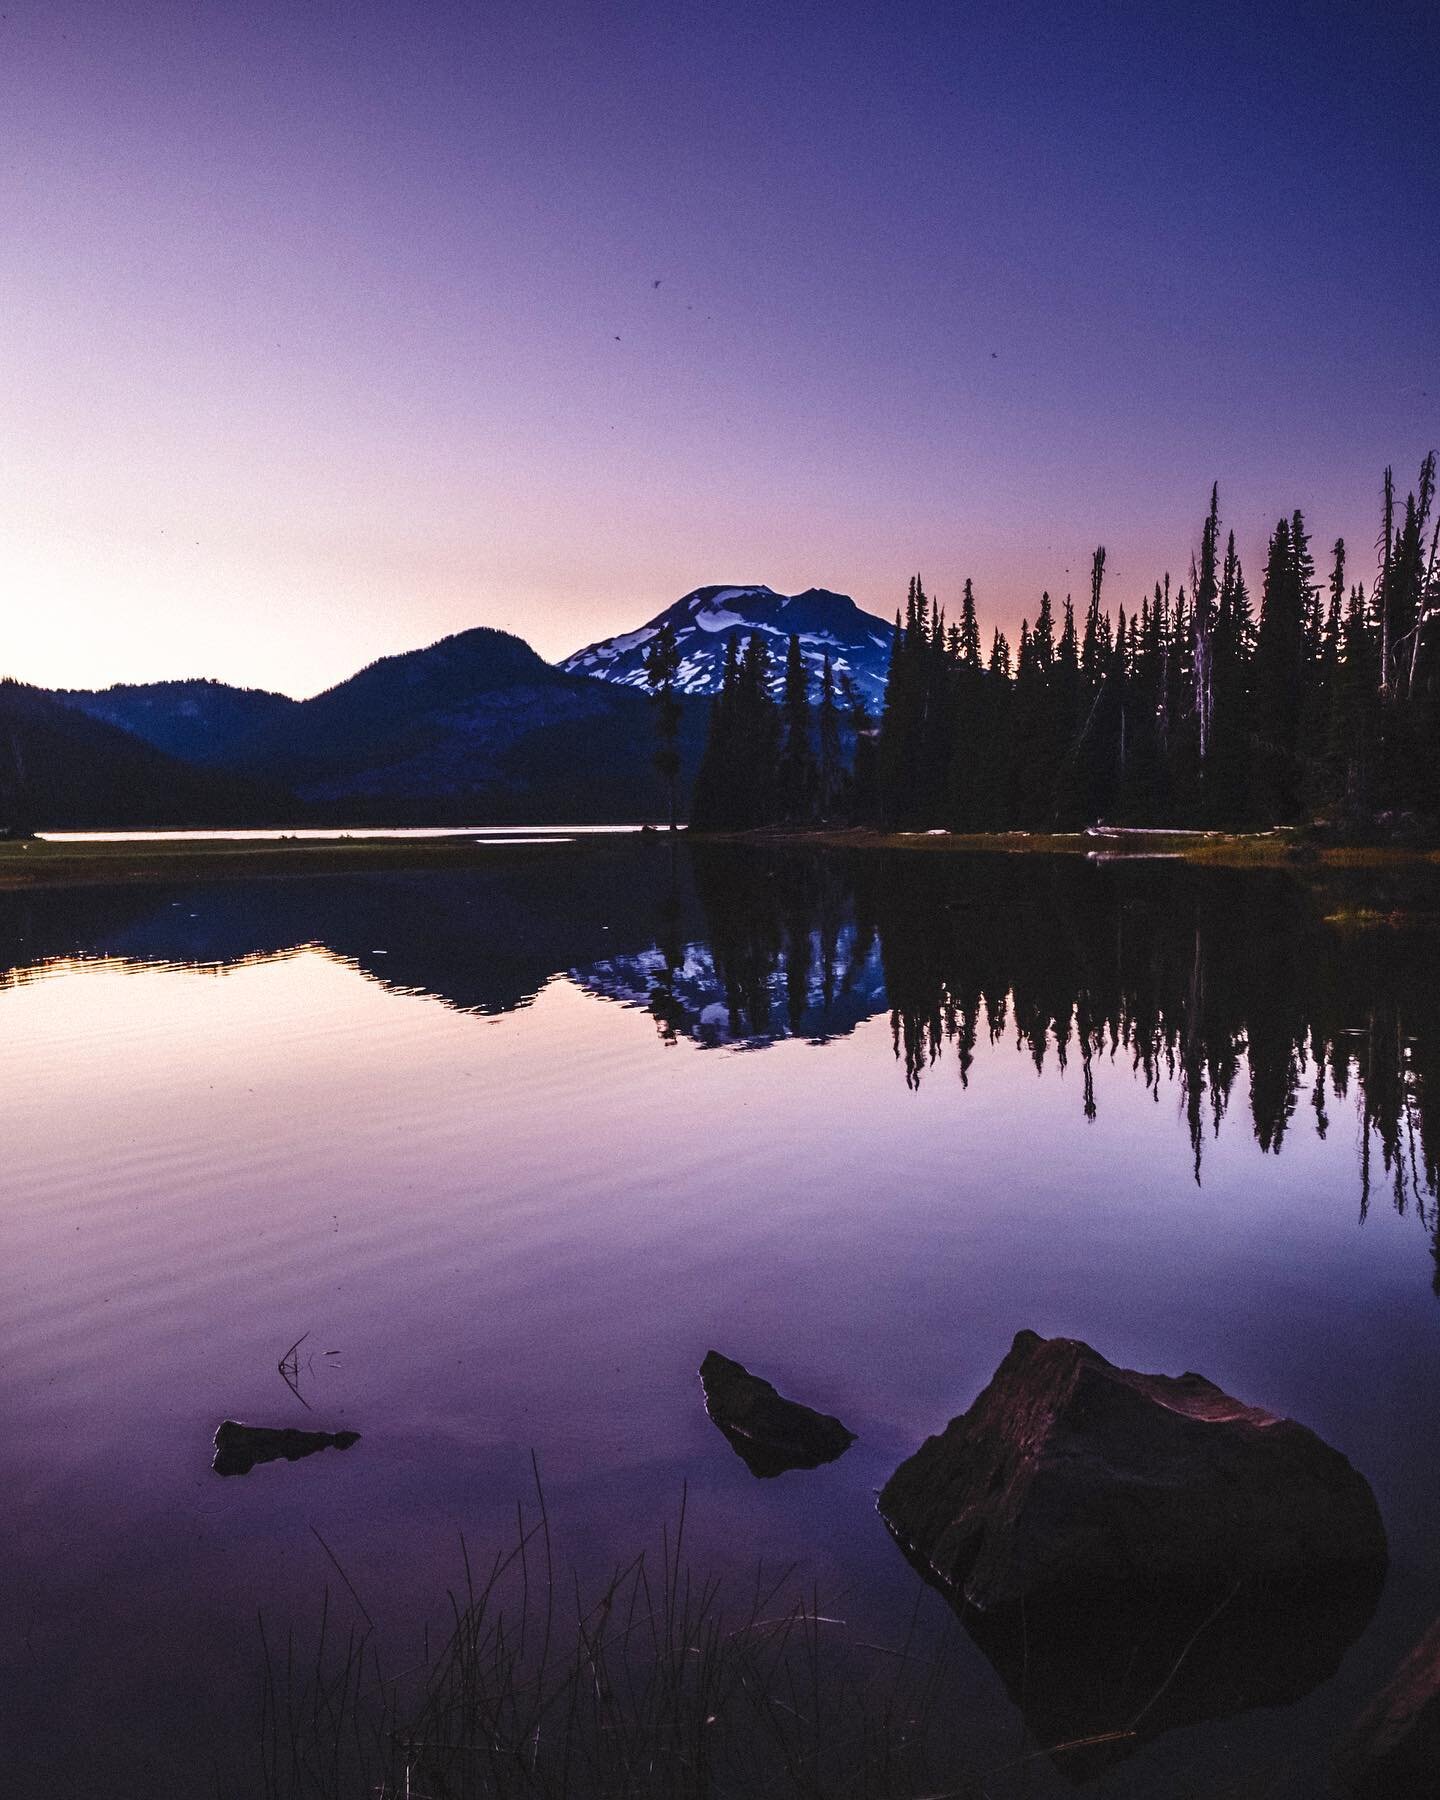 Such a calm night with @suzanne.price .
.
.
.
.
#Wishyouwerenorthwest#northwestisbest #upperleftusa#optoutside #getoutside #outsideisfree#neverstopexploring #outside_project#wildernessculture #liveunscripted#lifeofadventure #naturesvisuals#liverefres